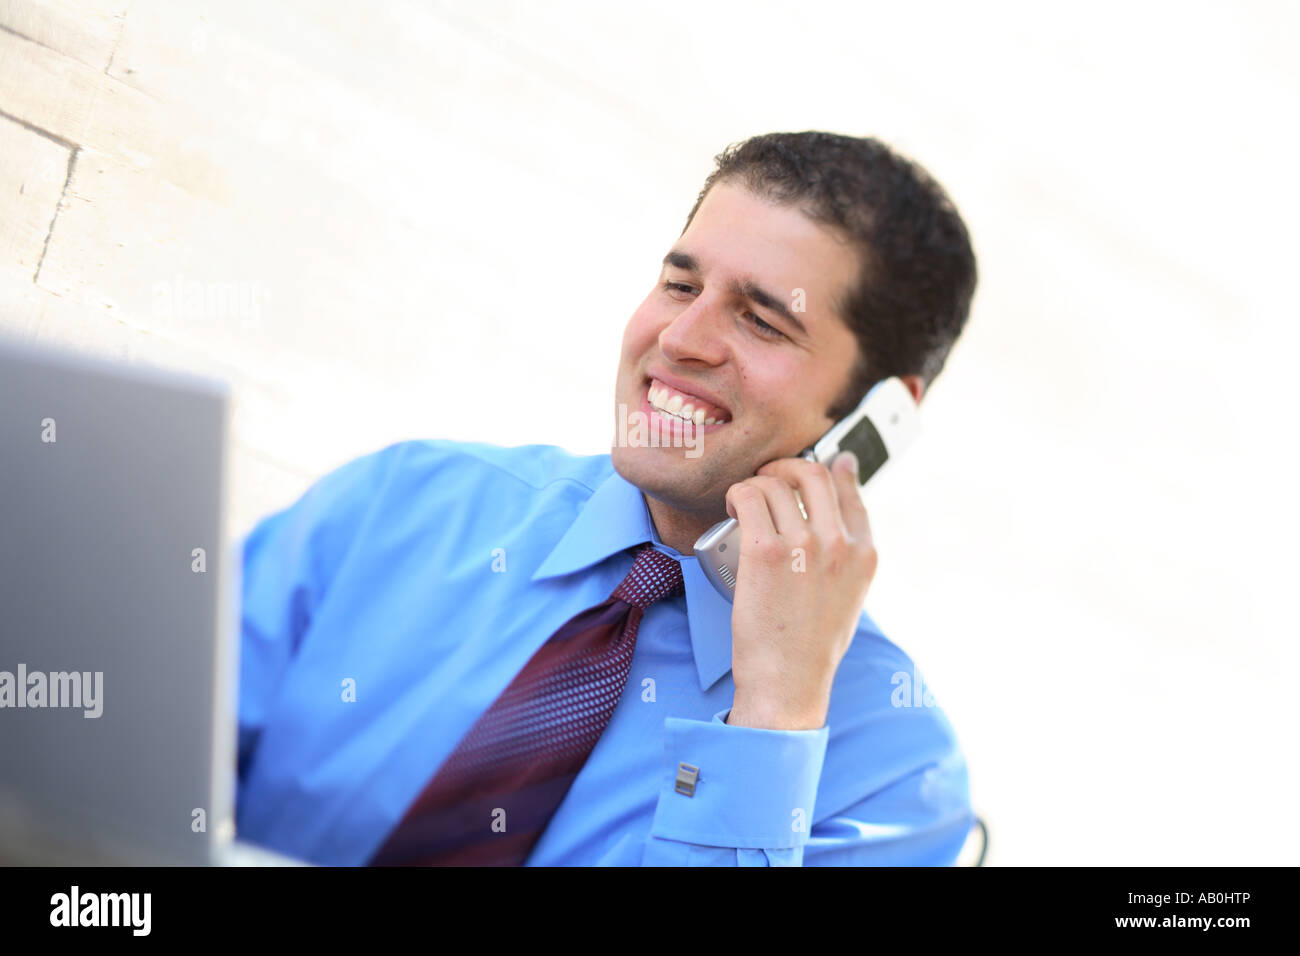 Young businessman using cell phone Banque D'Images